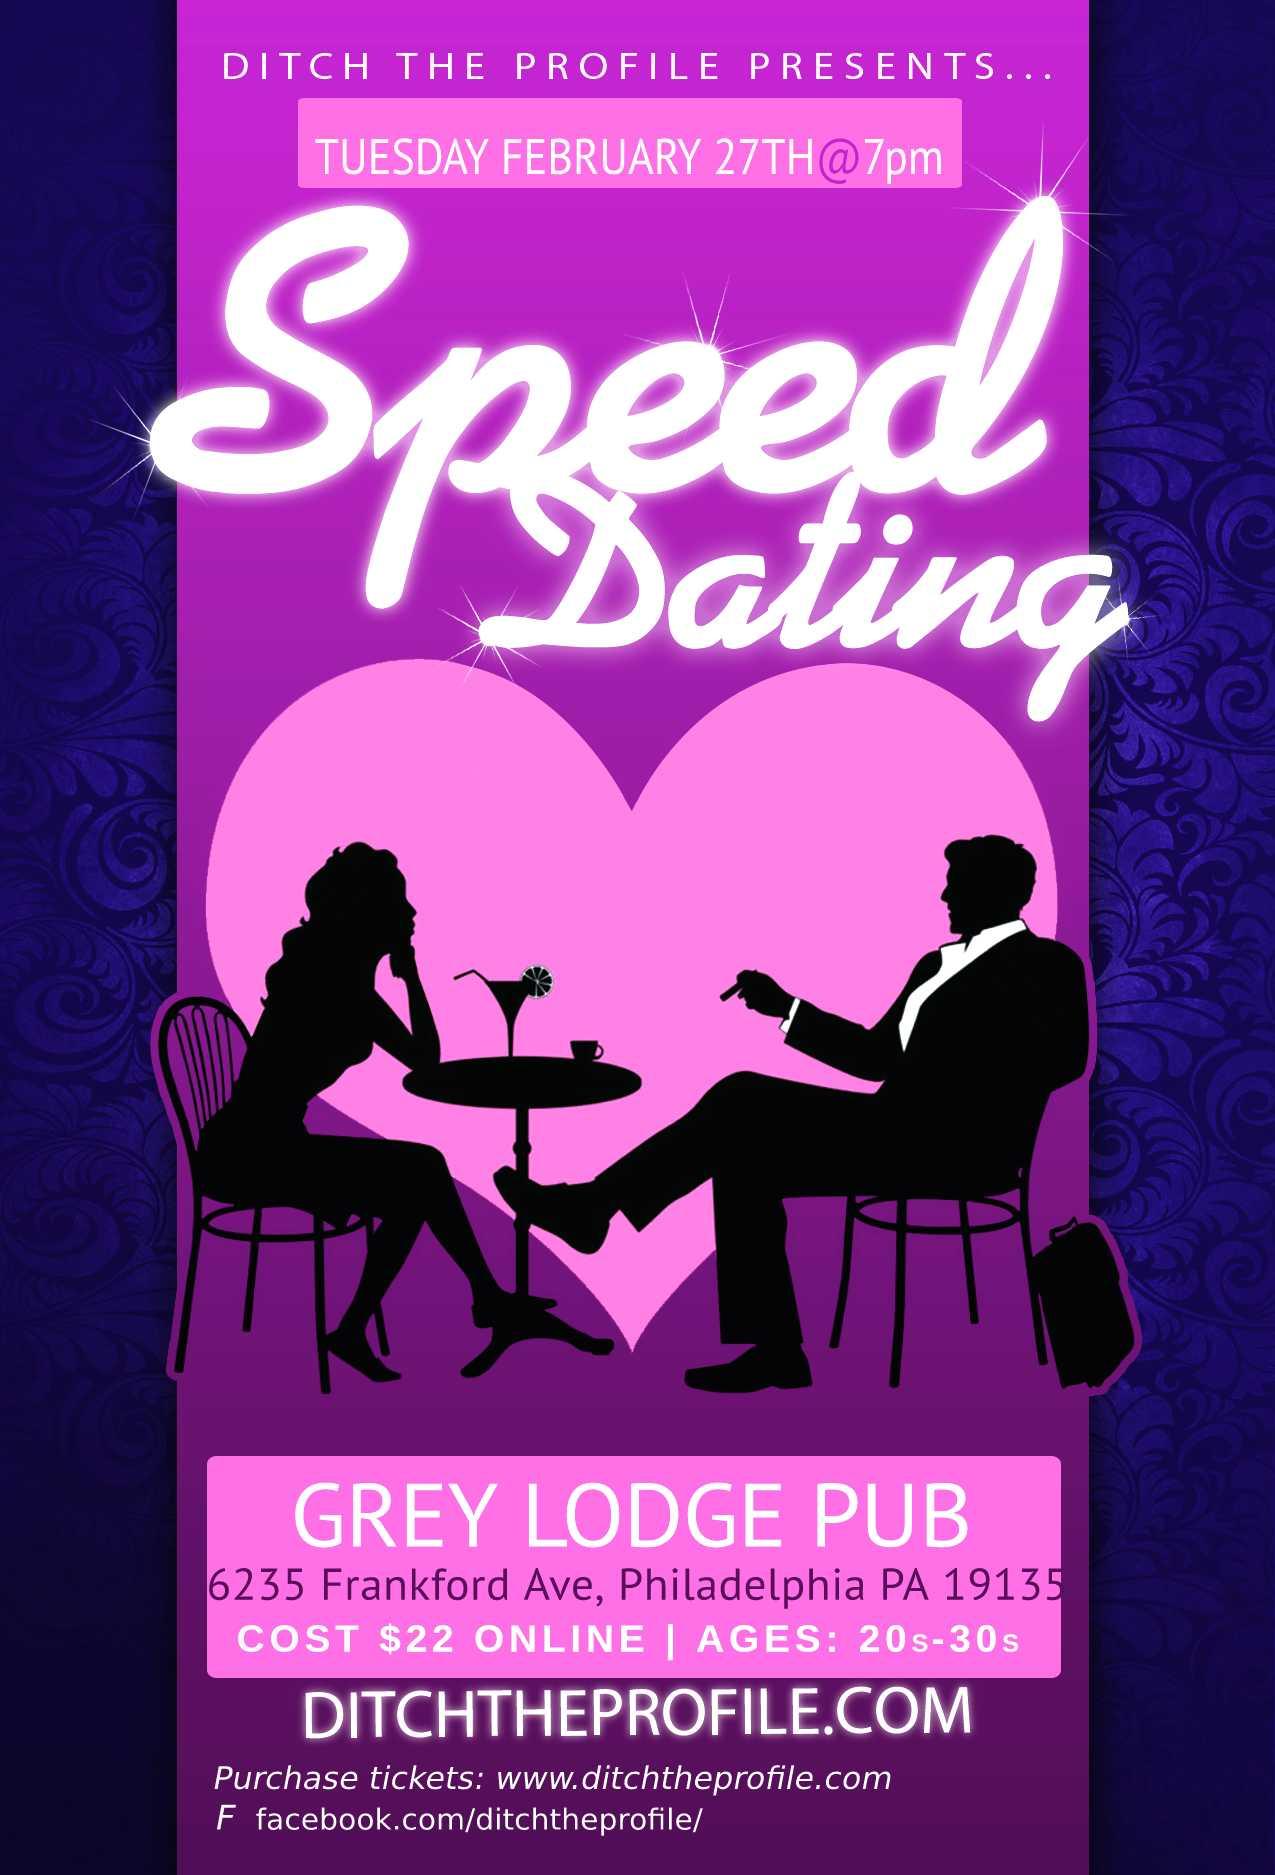 speed dating events phoenix az this weekend